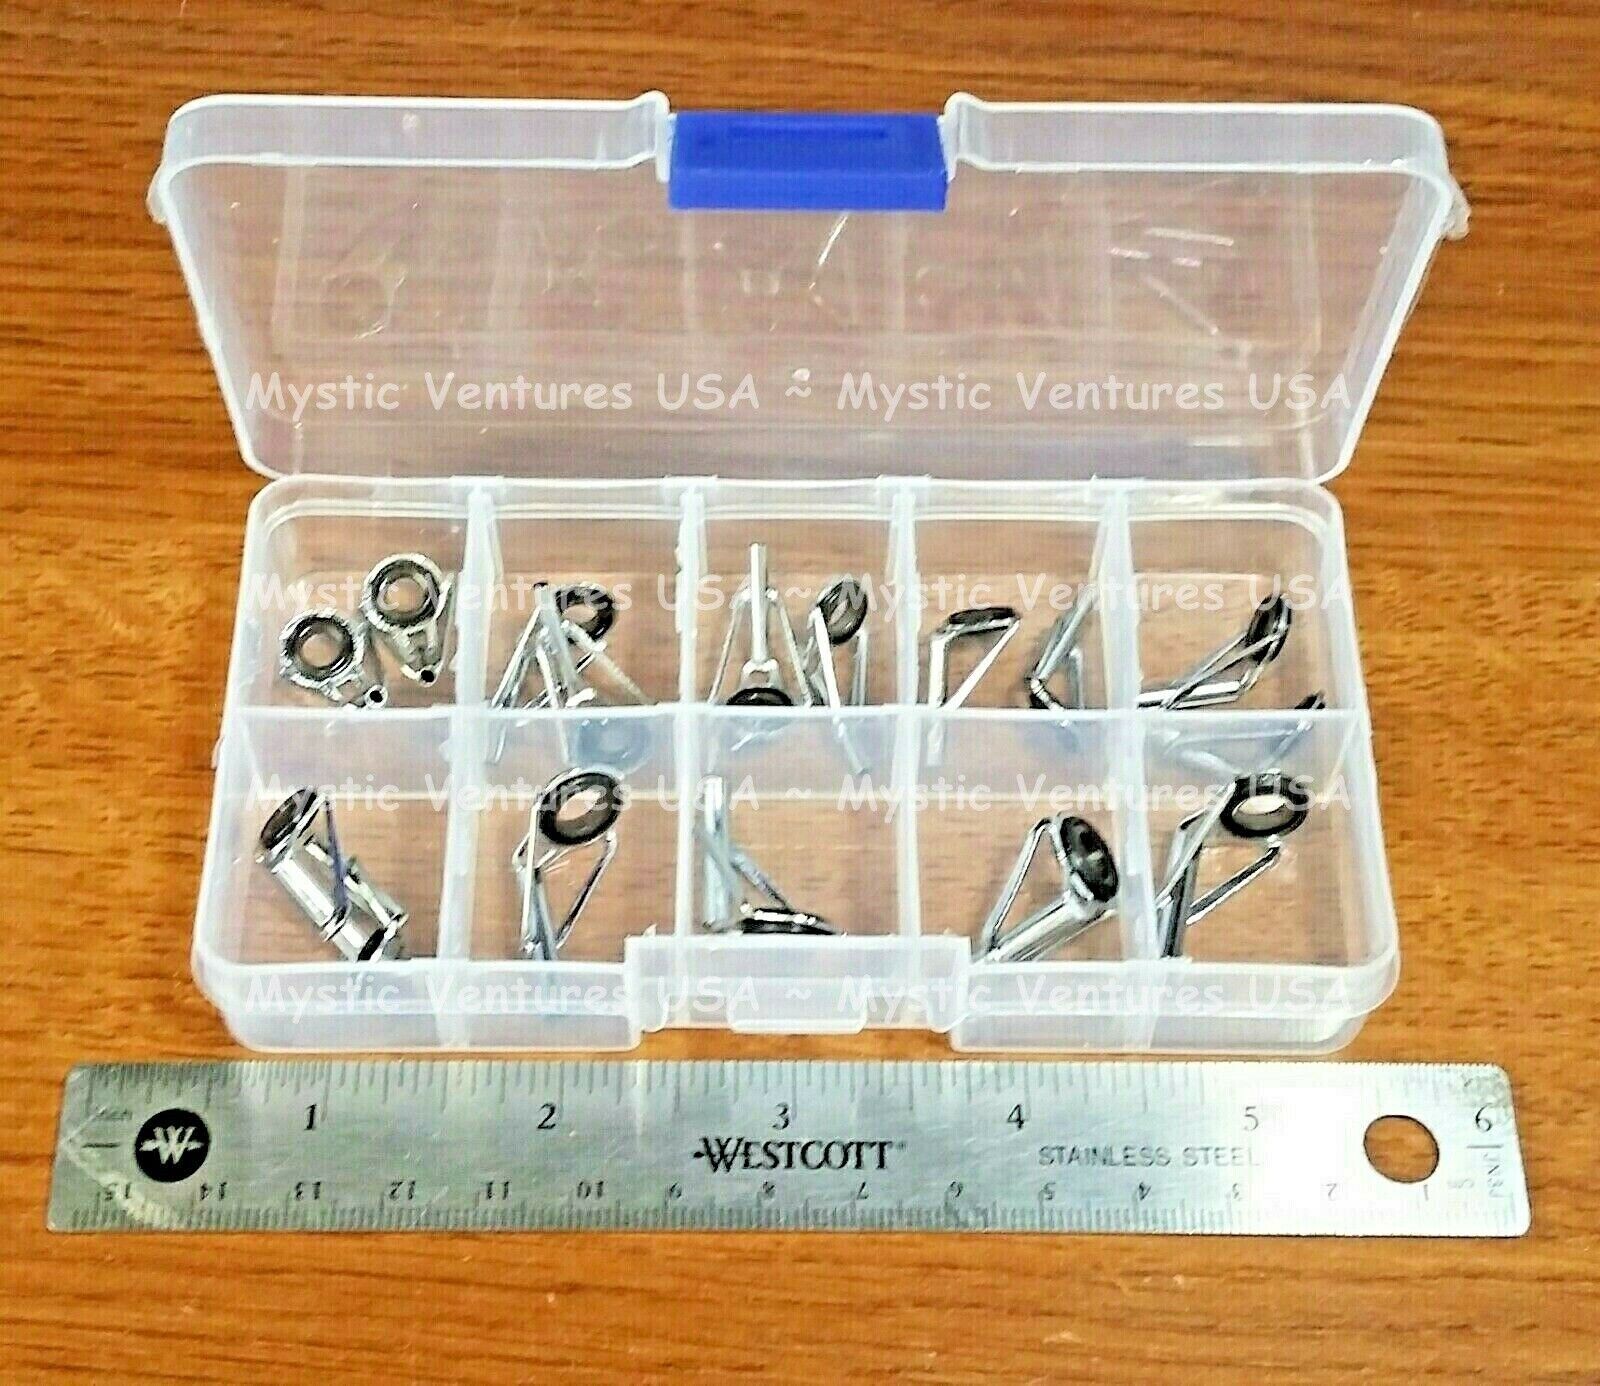 16 Piece Rod Tip Guide Eyes Repair Kit DIY - 10 DIFFERENT SIZES & CASE! Unbranded Does Not Apply